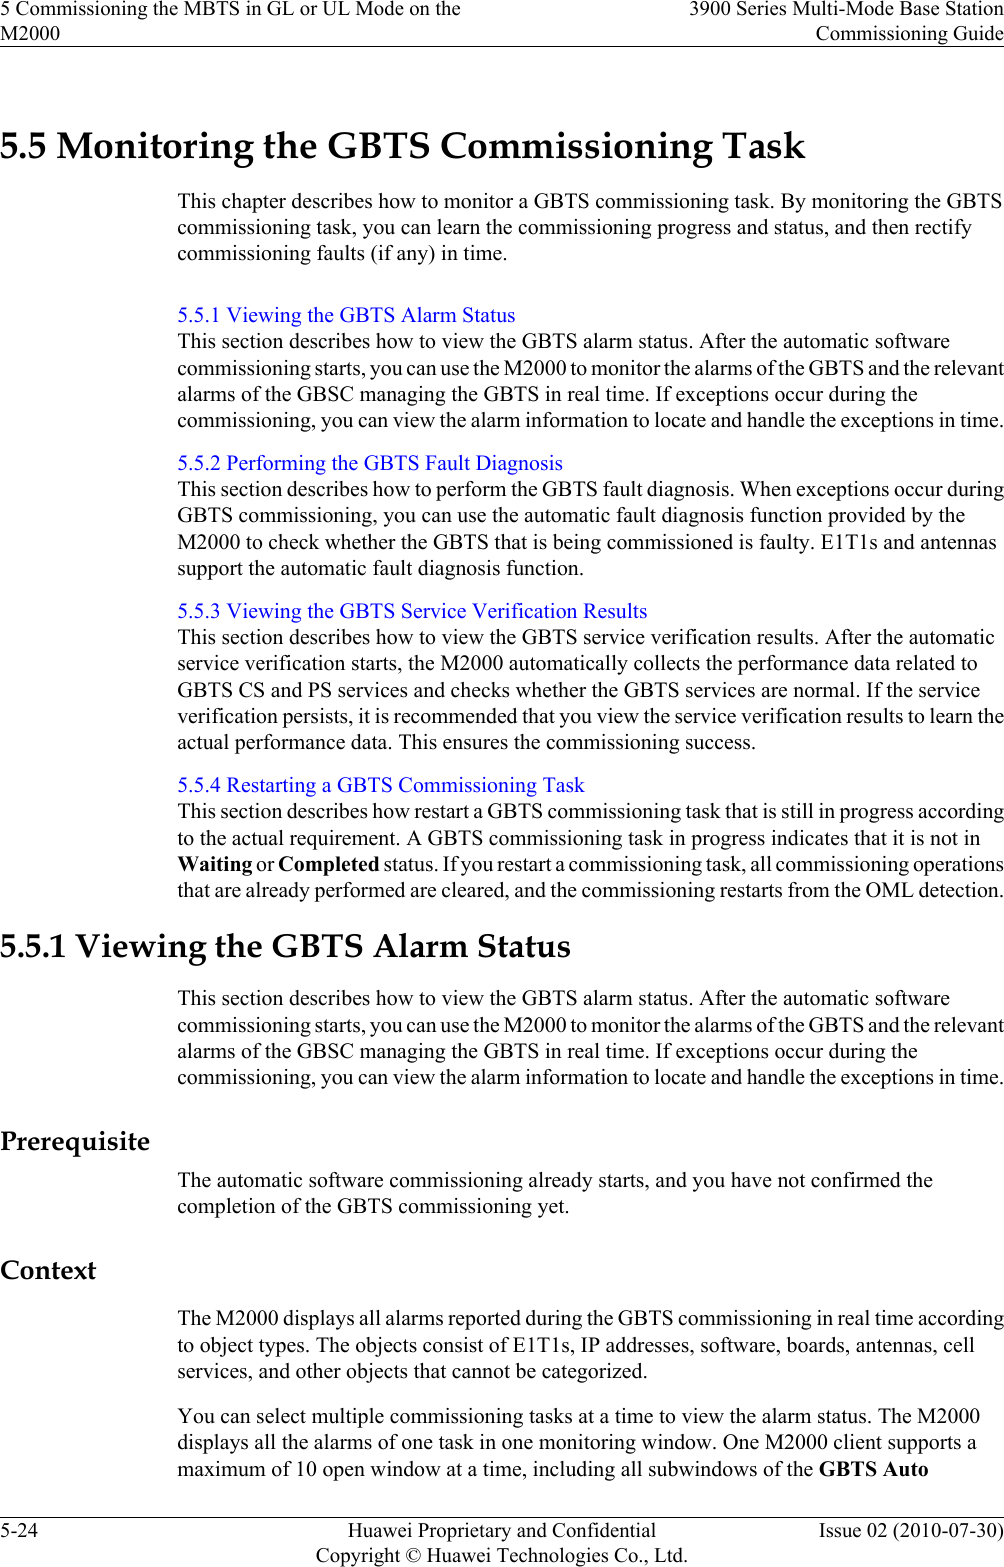 5.5 Monitoring the GBTS Commissioning TaskThis chapter describes how to monitor a GBTS commissioning task. By monitoring the GBTScommissioning task, you can learn the commissioning progress and status, and then rectifycommissioning faults (if any) in time.5.5.1 Viewing the GBTS Alarm StatusThis section describes how to view the GBTS alarm status. After the automatic softwarecommissioning starts, you can use the M2000 to monitor the alarms of the GBTS and the relevantalarms of the GBSC managing the GBTS in real time. If exceptions occur during thecommissioning, you can view the alarm information to locate and handle the exceptions in time.5.5.2 Performing the GBTS Fault DiagnosisThis section describes how to perform the GBTS fault diagnosis. When exceptions occur duringGBTS commissioning, you can use the automatic fault diagnosis function provided by theM2000 to check whether the GBTS that is being commissioned is faulty. E1T1s and antennassupport the automatic fault diagnosis function.5.5.3 Viewing the GBTS Service Verification ResultsThis section describes how to view the GBTS service verification results. After the automaticservice verification starts, the M2000 automatically collects the performance data related toGBTS CS and PS services and checks whether the GBTS services are normal. If the serviceverification persists, it is recommended that you view the service verification results to learn theactual performance data. This ensures the commissioning success.5.5.4 Restarting a GBTS Commissioning TaskThis section describes how restart a GBTS commissioning task that is still in progress accordingto the actual requirement. A GBTS commissioning task in progress indicates that it is not inWaiting or Completed status. If you restart a commissioning task, all commissioning operationsthat are already performed are cleared, and the commissioning restarts from the OML detection.5.5.1 Viewing the GBTS Alarm StatusThis section describes how to view the GBTS alarm status. After the automatic softwarecommissioning starts, you can use the M2000 to monitor the alarms of the GBTS and the relevantalarms of the GBSC managing the GBTS in real time. If exceptions occur during thecommissioning, you can view the alarm information to locate and handle the exceptions in time.PrerequisiteThe automatic software commissioning already starts, and you have not confirmed thecompletion of the GBTS commissioning yet.ContextThe M2000 displays all alarms reported during the GBTS commissioning in real time accordingto object types. The objects consist of E1T1s, IP addresses, software, boards, antennas, cellservices, and other objects that cannot be categorized.You can select multiple commissioning tasks at a time to view the alarm status. The M2000displays all the alarms of one task in one monitoring window. One M2000 client supports amaximum of 10 open window at a time, including all subwindows of the GBTS Auto5 Commissioning the MBTS in GL or UL Mode on theM20003900 Series Multi-Mode Base StationCommissioning Guide5-24 Huawei Proprietary and ConfidentialCopyright © Huawei Technologies Co., Ltd.Issue 02 (2010-07-30)